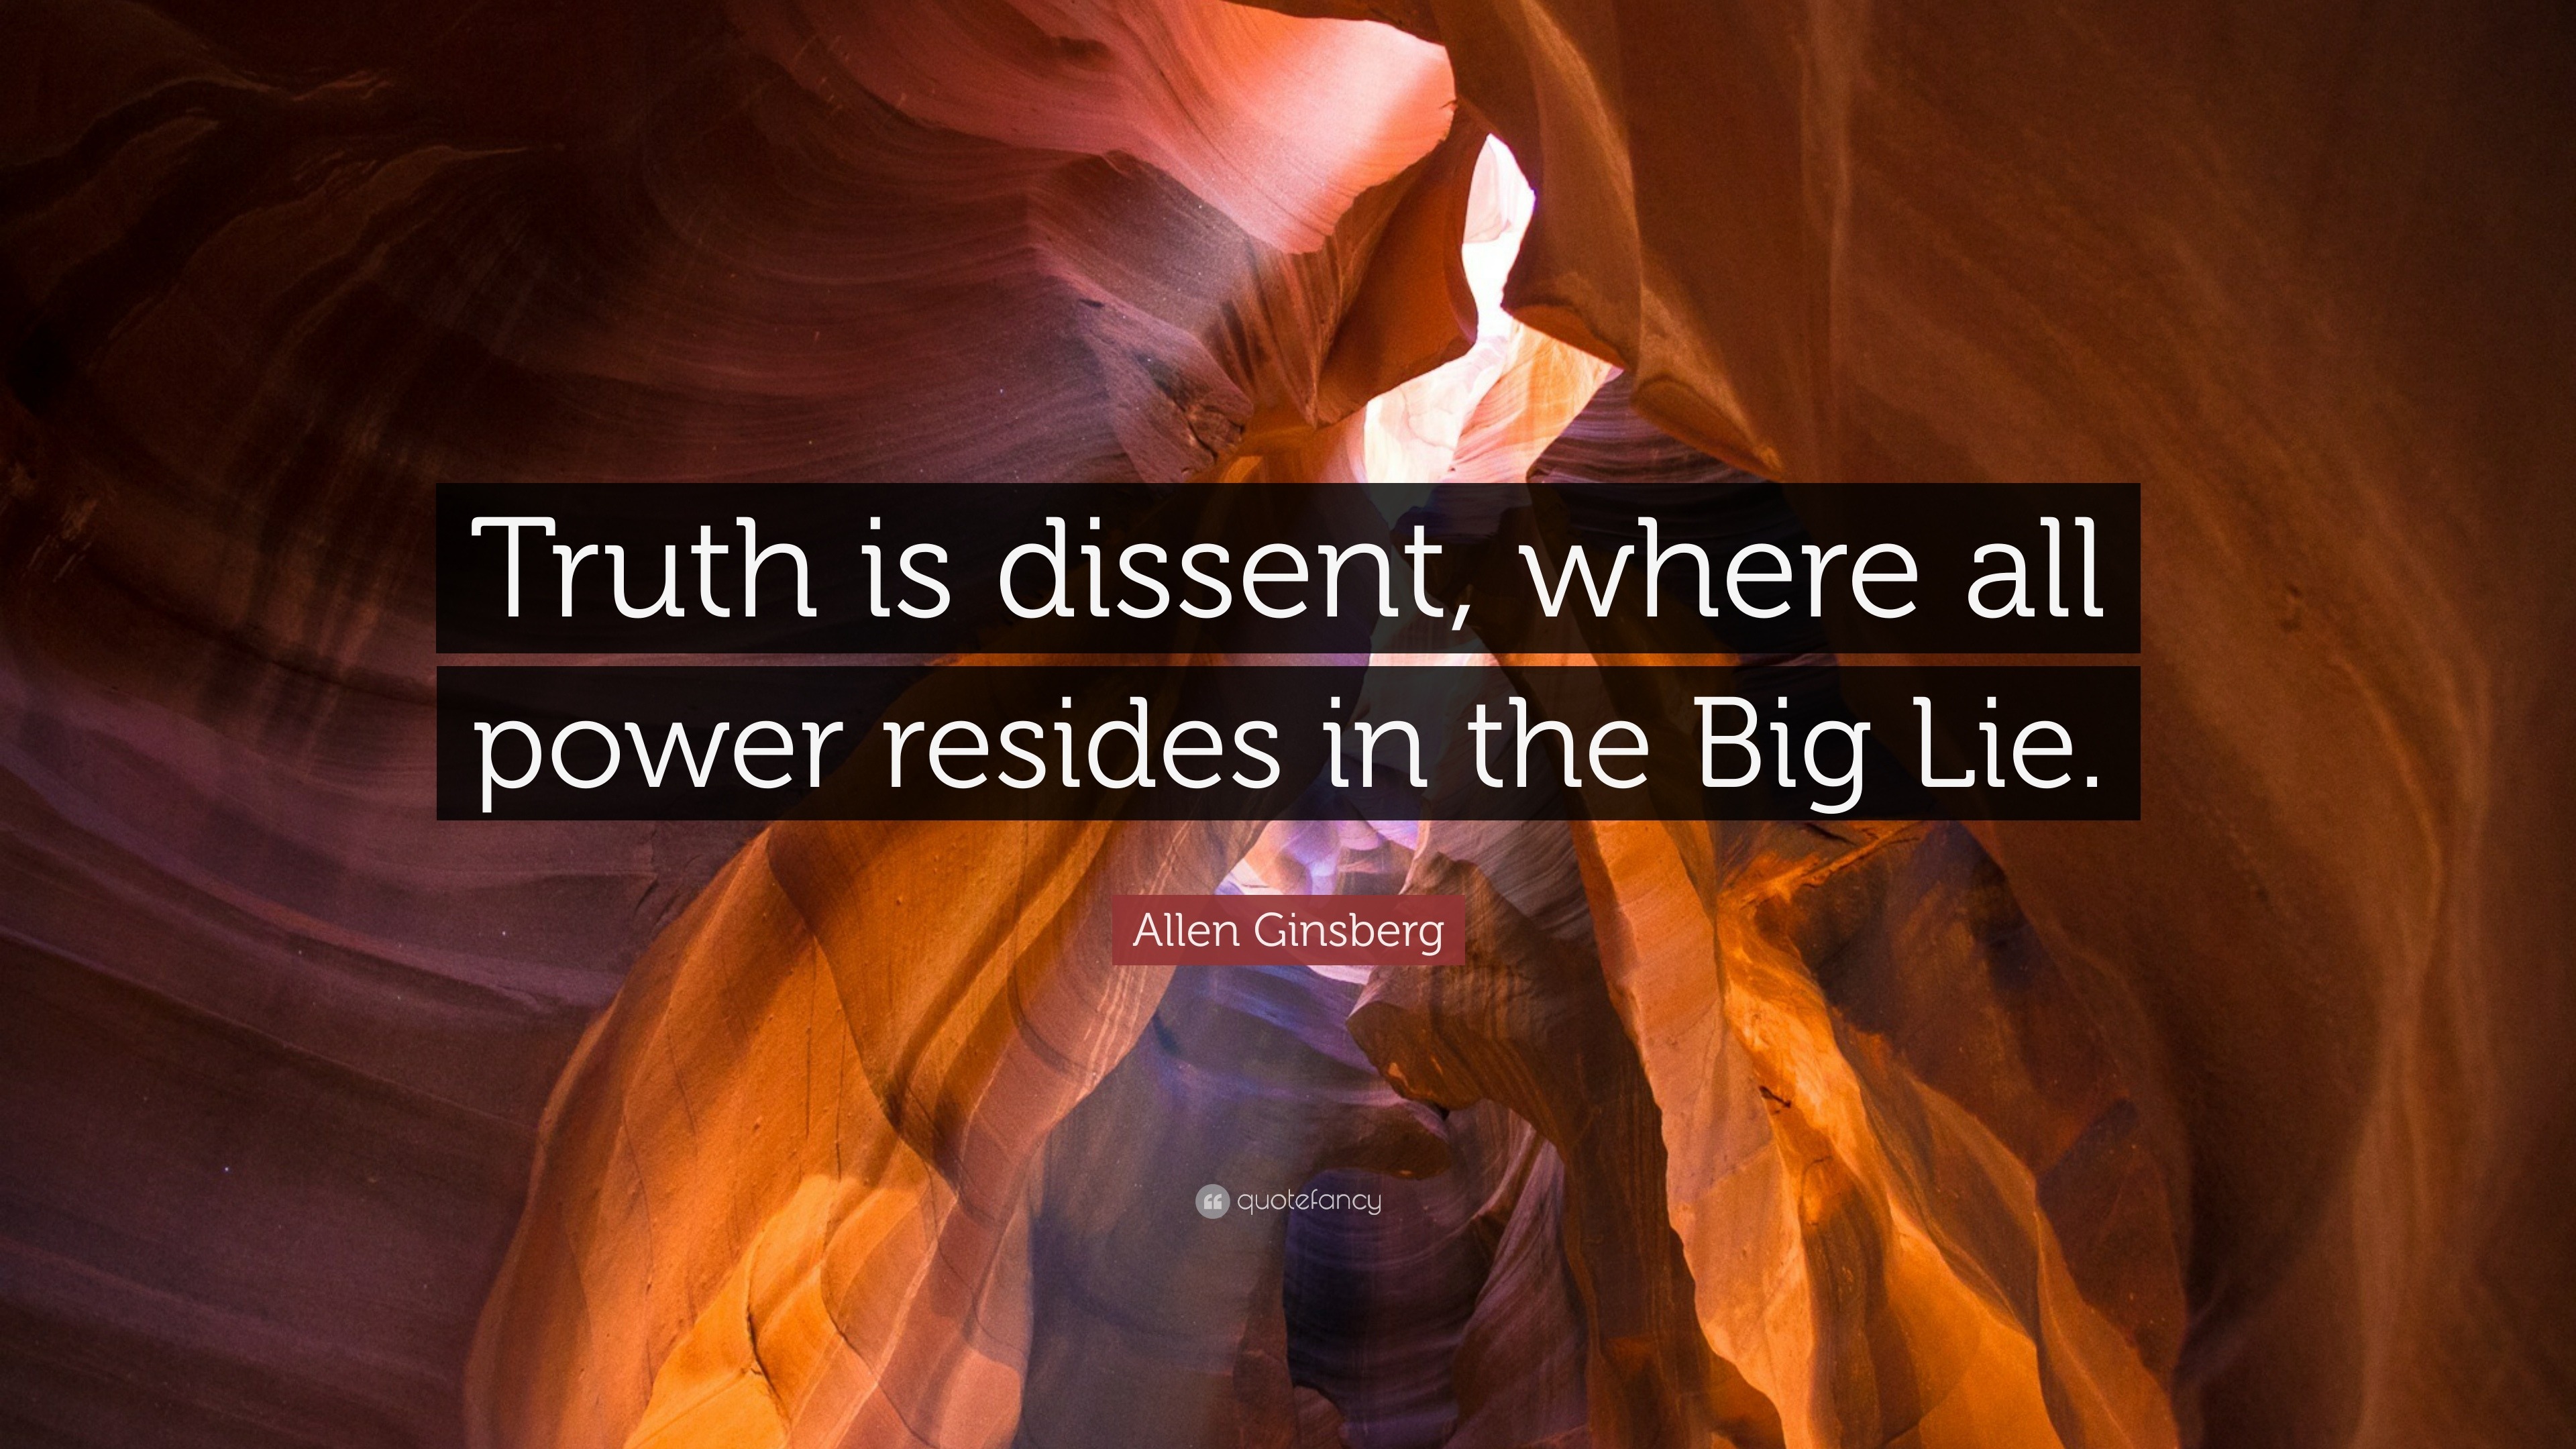 Allen Ginsberg Quote: “Truth is dissent, where all power resides in the Big Lie ...